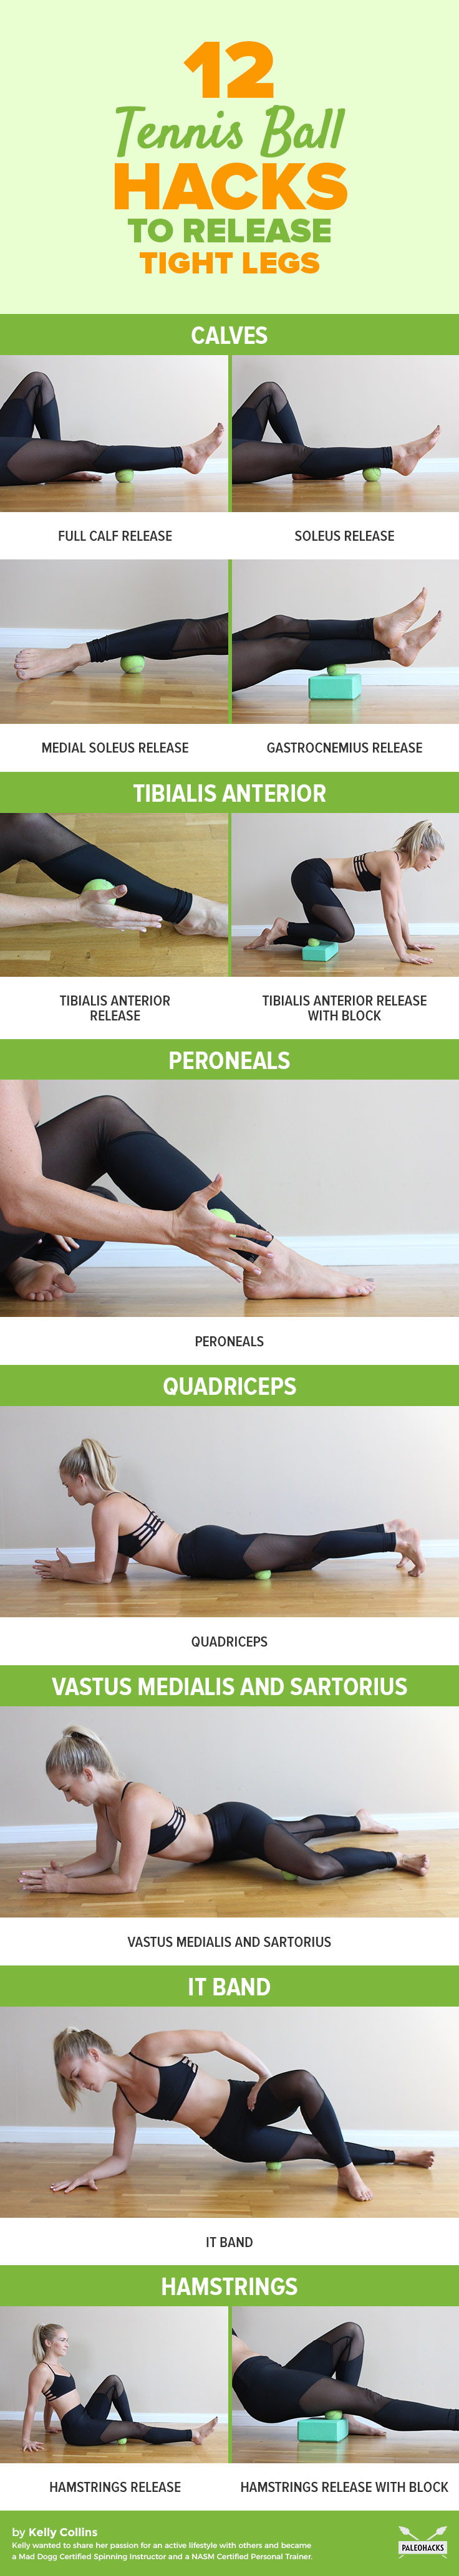 Release your calves, hamstrings, IT bands and other trigger points on your legs using these simple DIY tricks with tennis balls. Tennis Ball Massage.